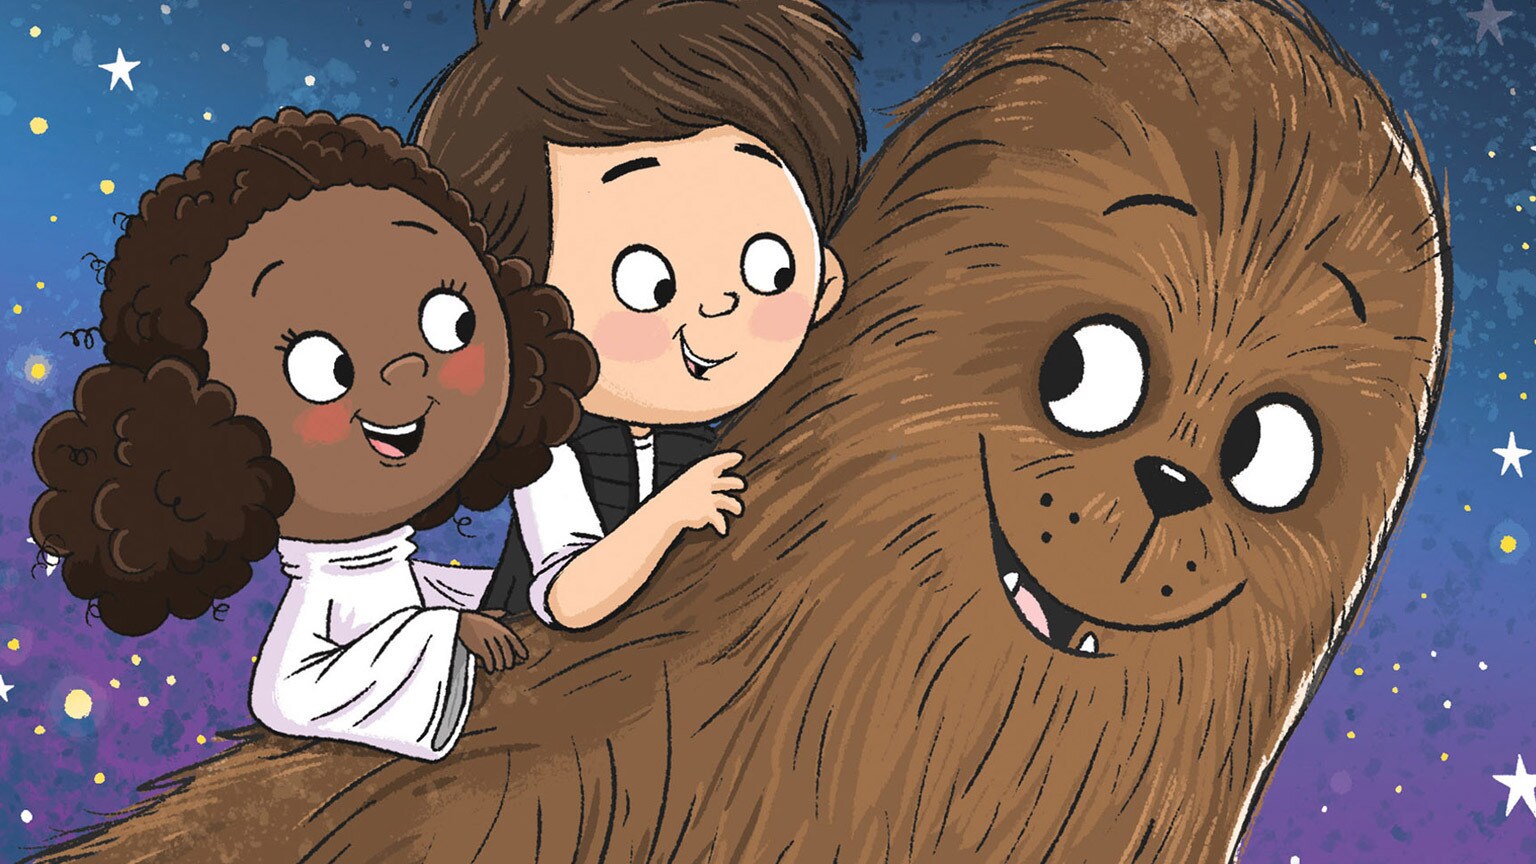 In I Wish I Had a Wookiee, Poems for the Young at Heart - Exclusive